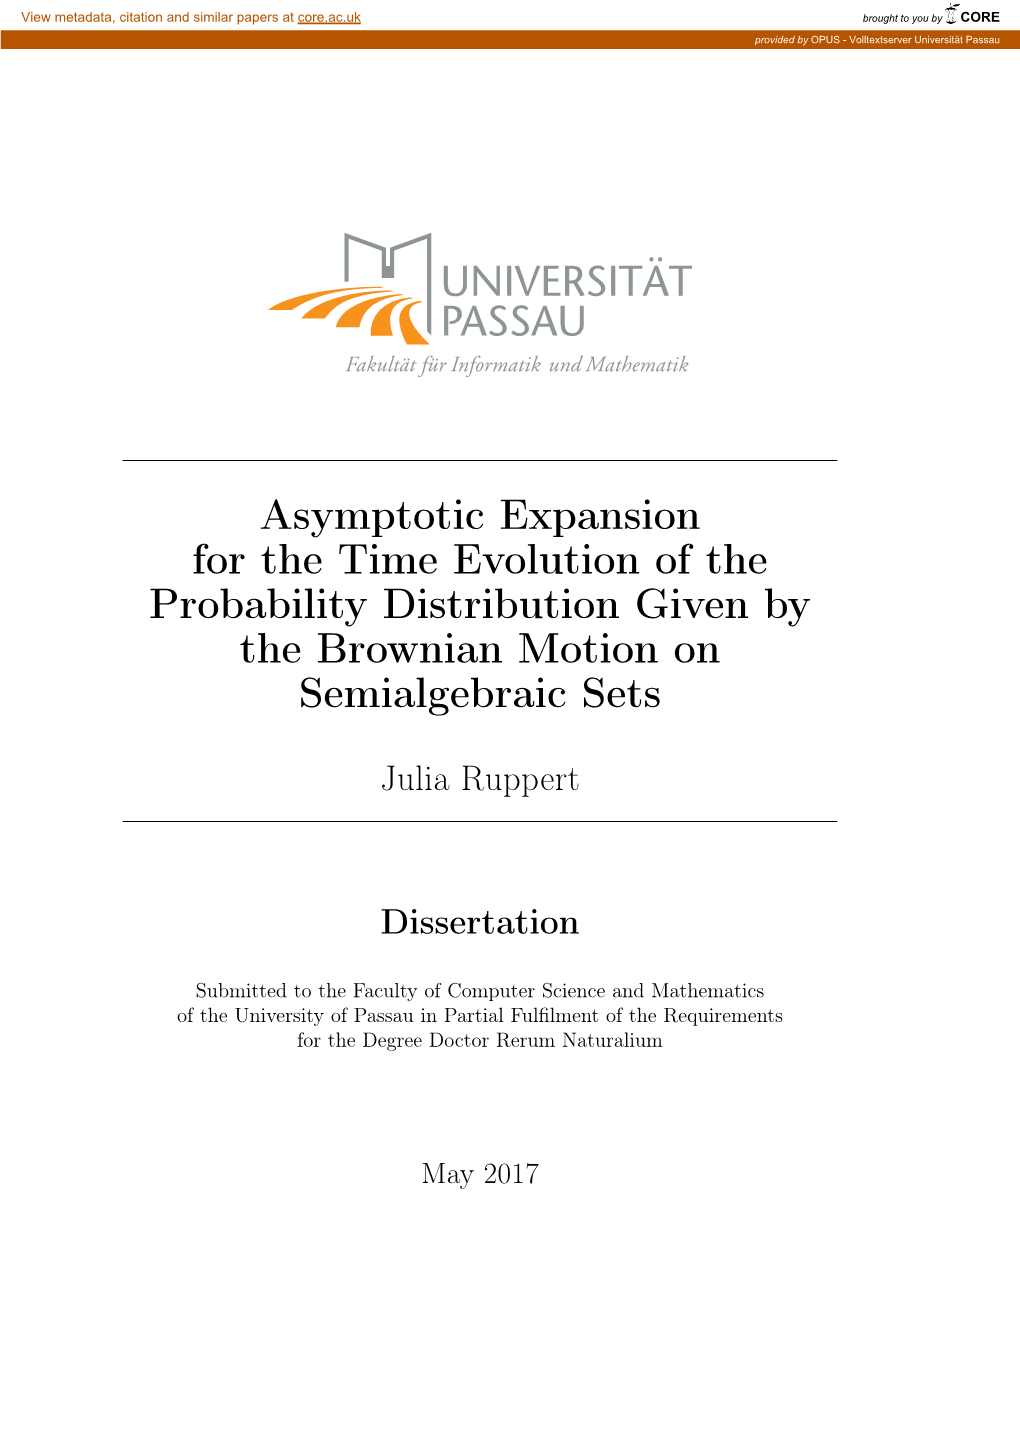 Asymptotic Expansion for the Time Evolution of the Probability Distribution Given by the Brownian Motion on Semialgebraic Sets